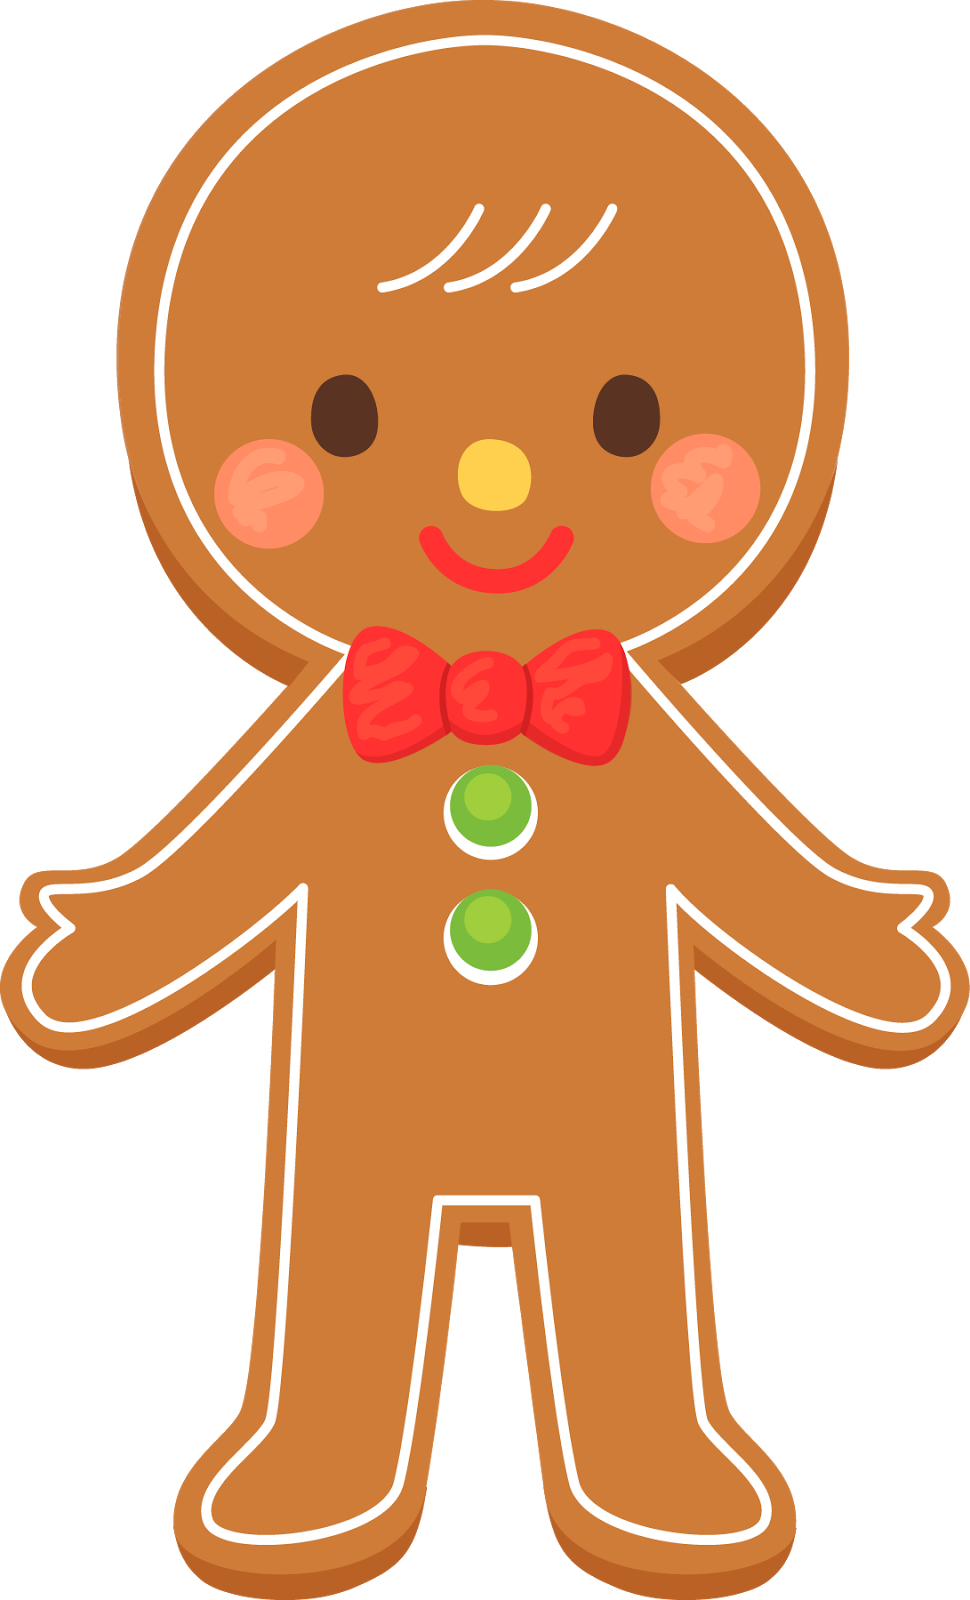 Clipart Of A Gingerbread Man Outline Cliparts co